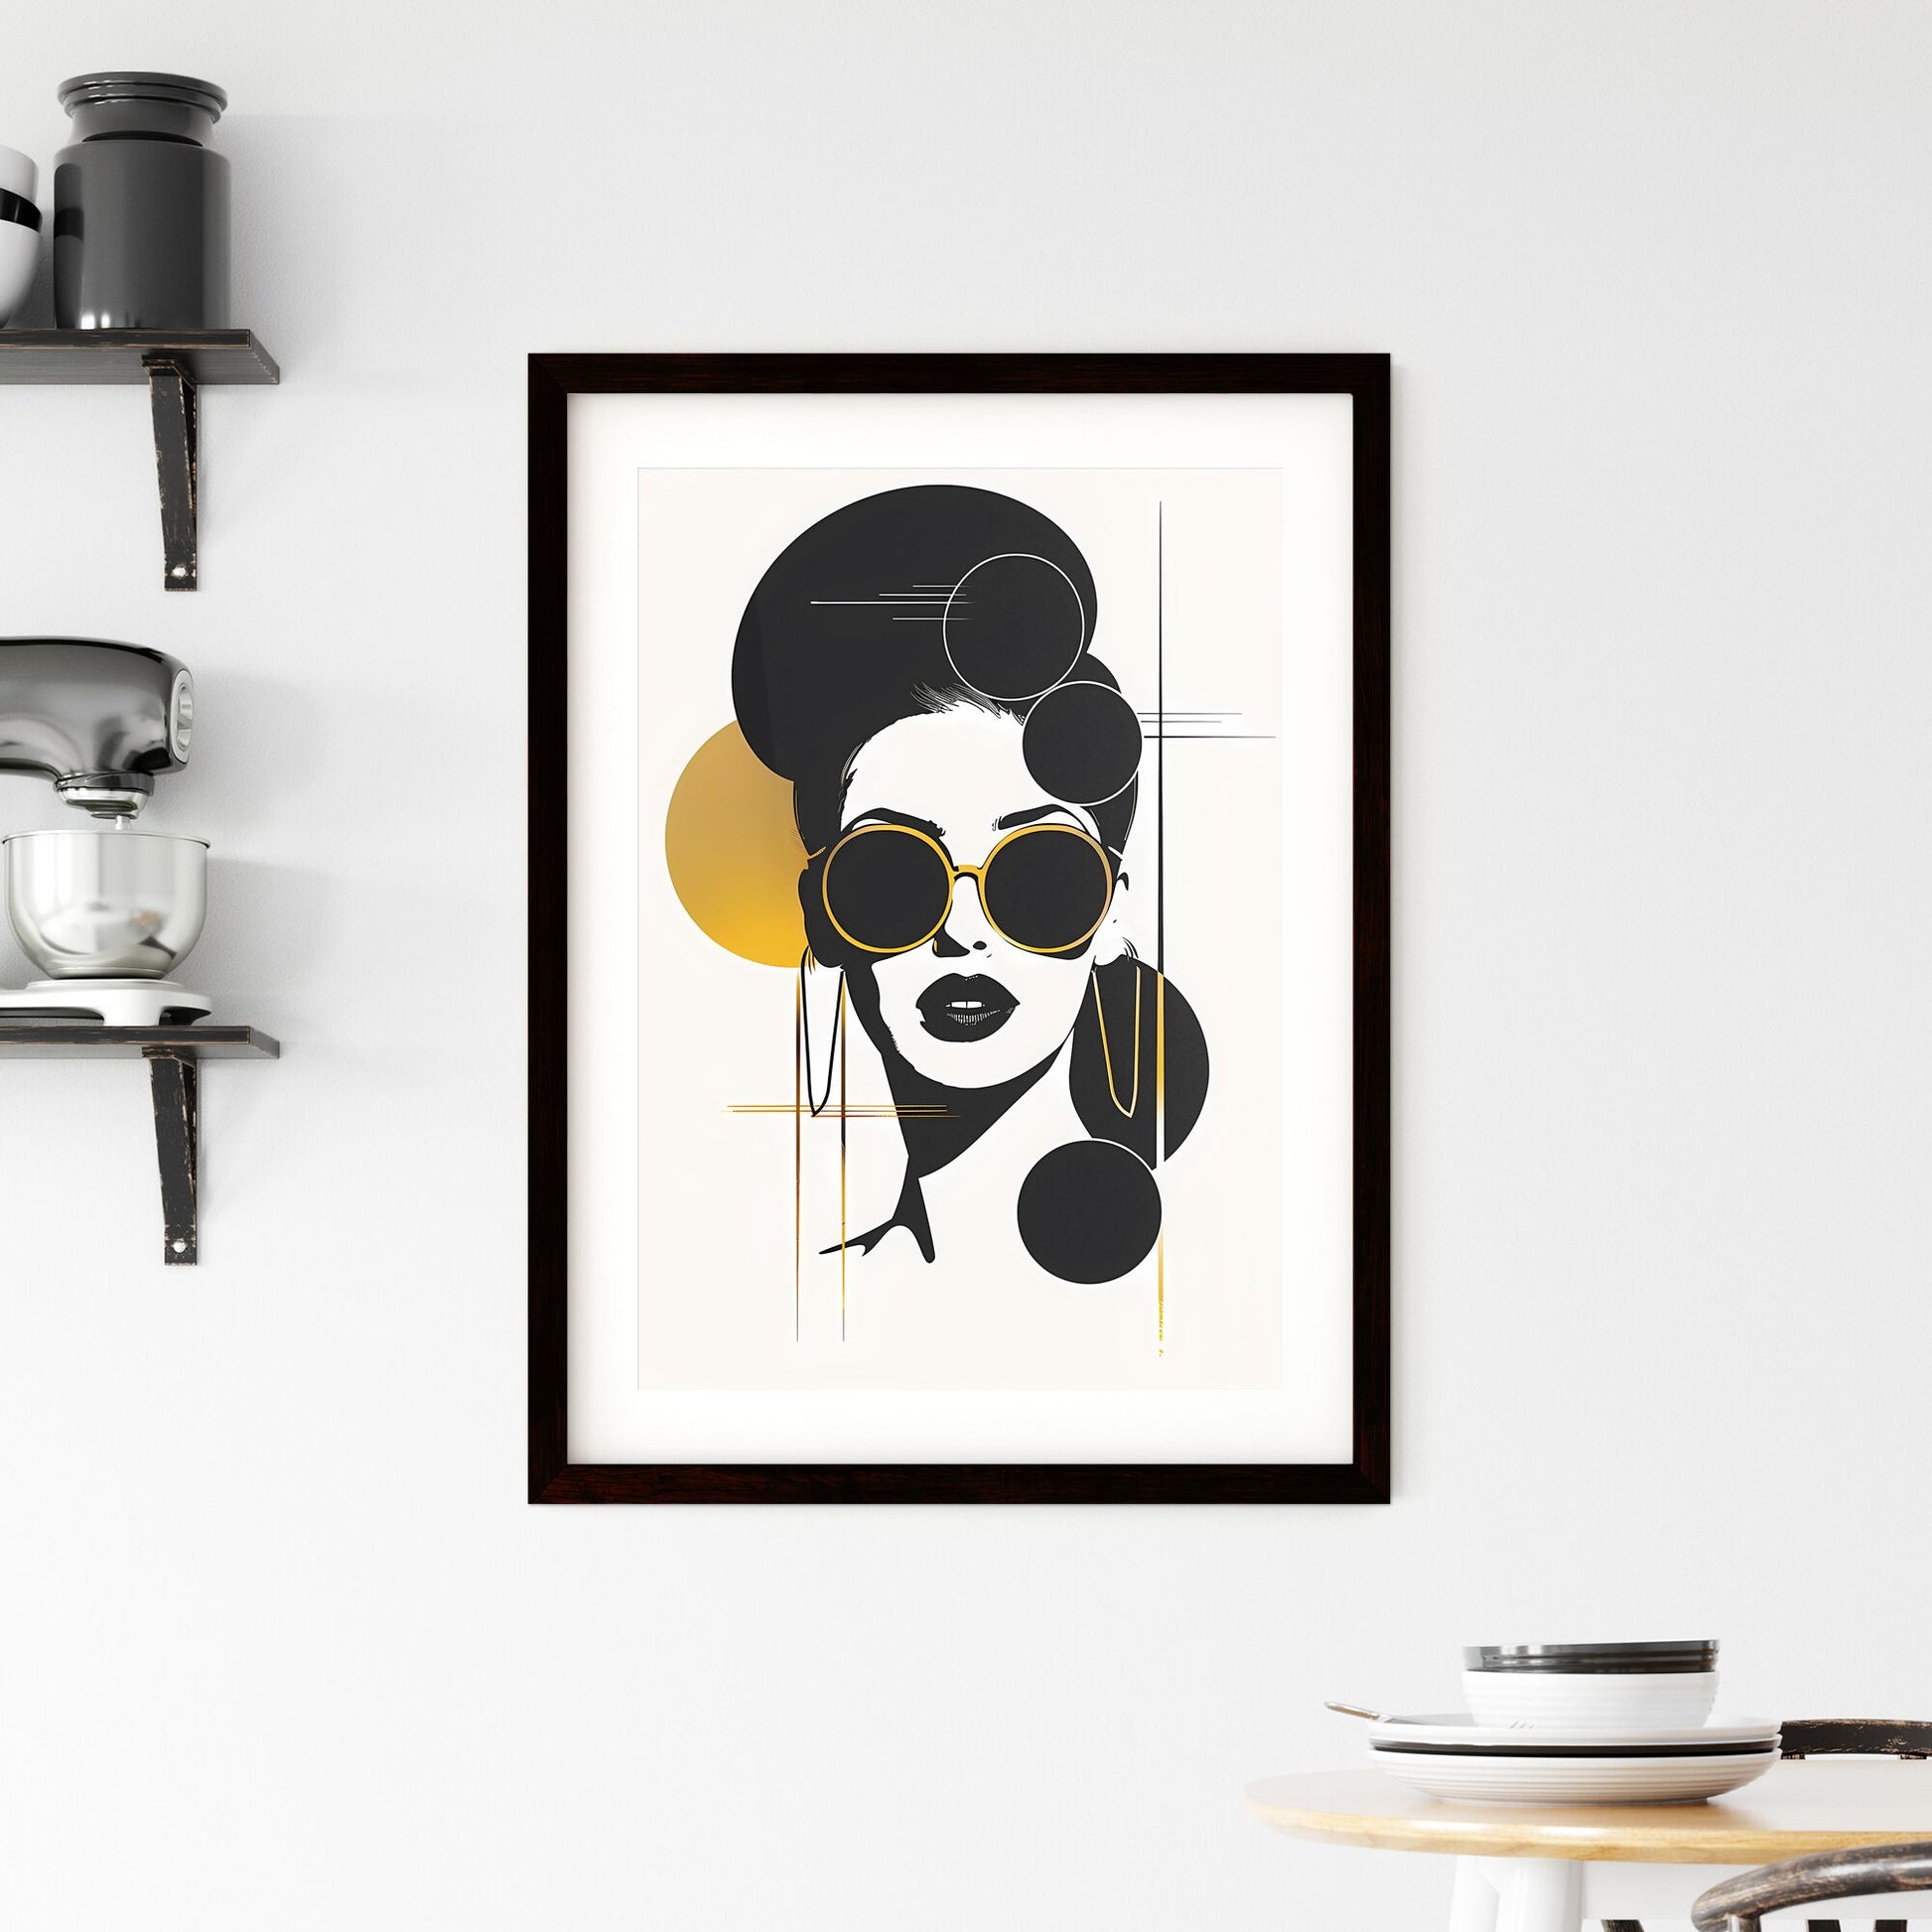 Minimalist Painting with Yellow Circle and Female with Single-Lens Sunglasses Emphasizing Art Default Title